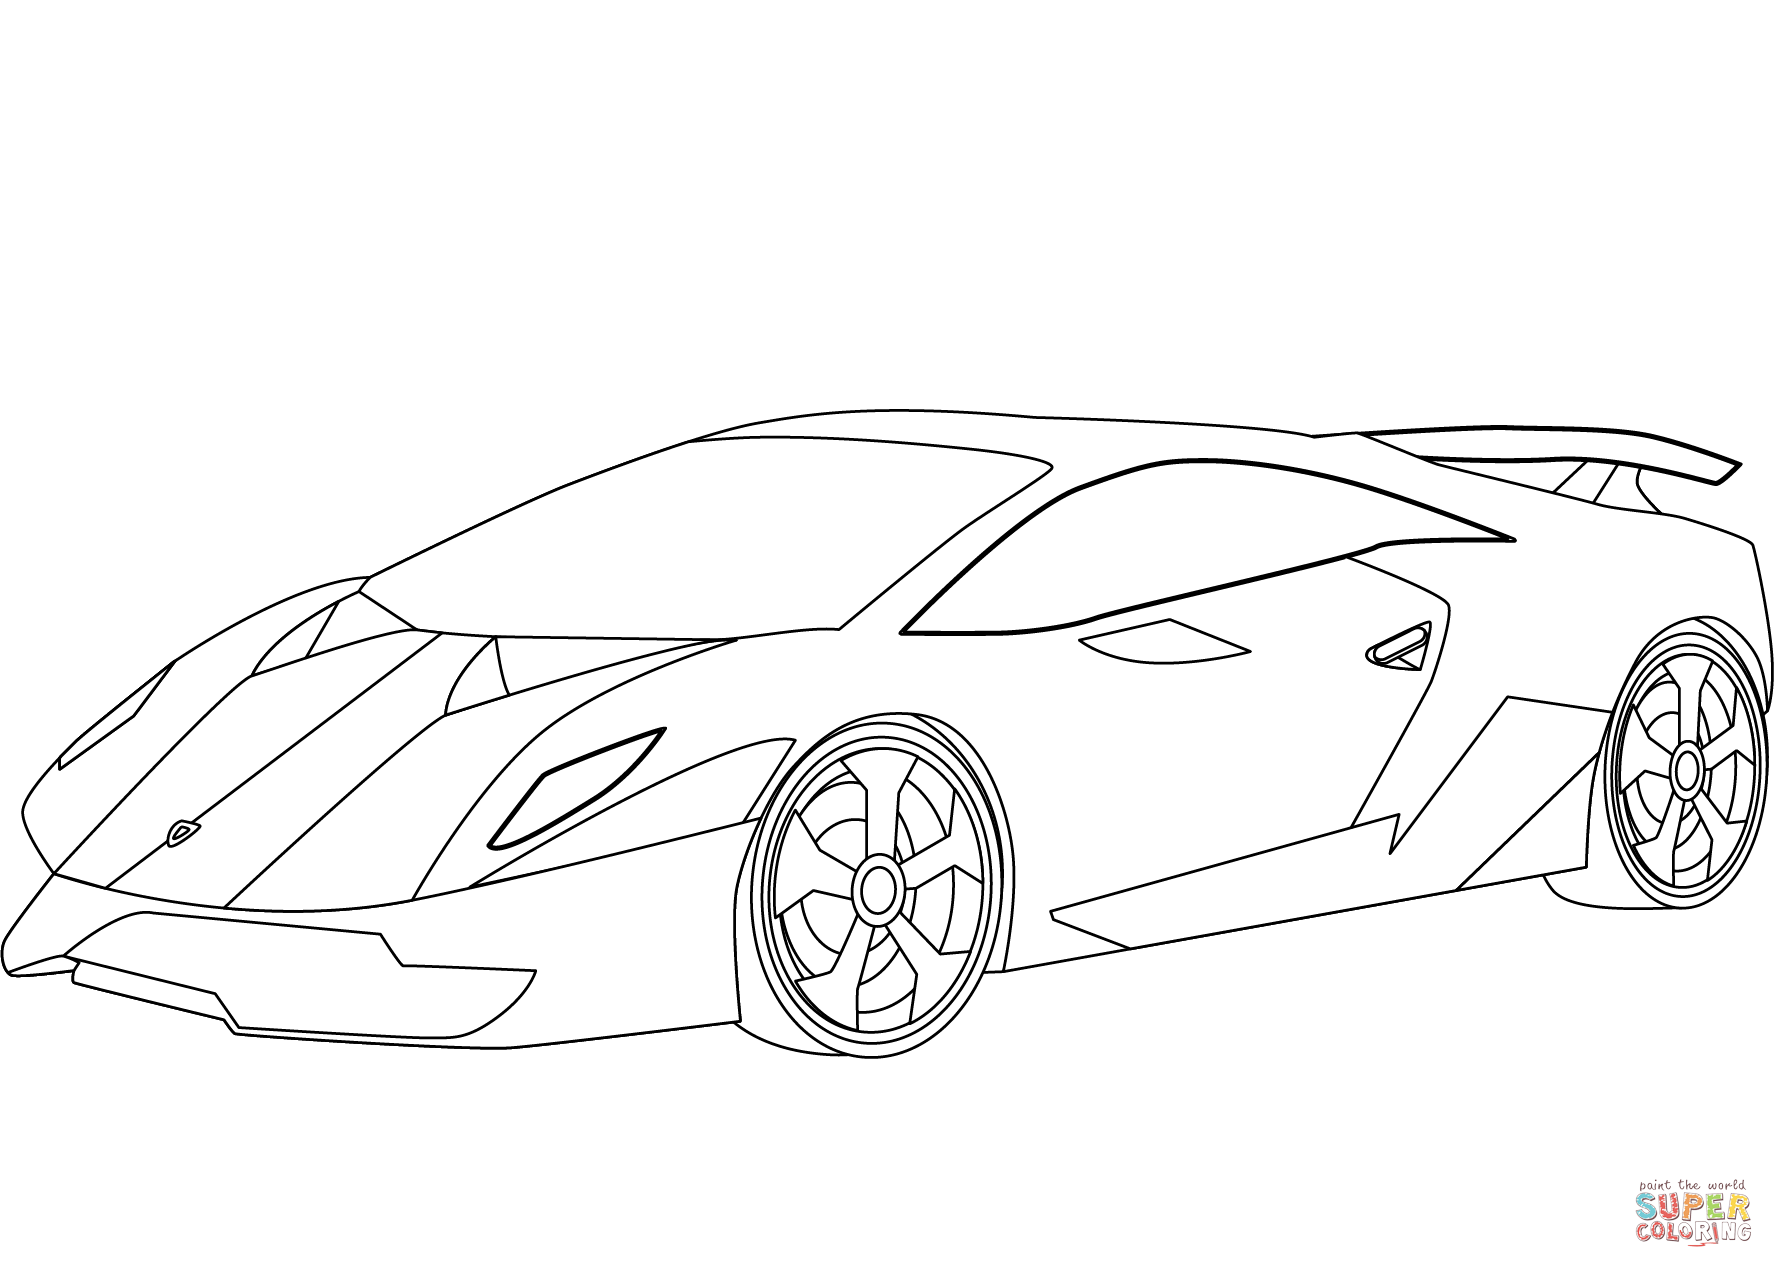 Lamborghini sesto elemento coloring page free printable coloring pages